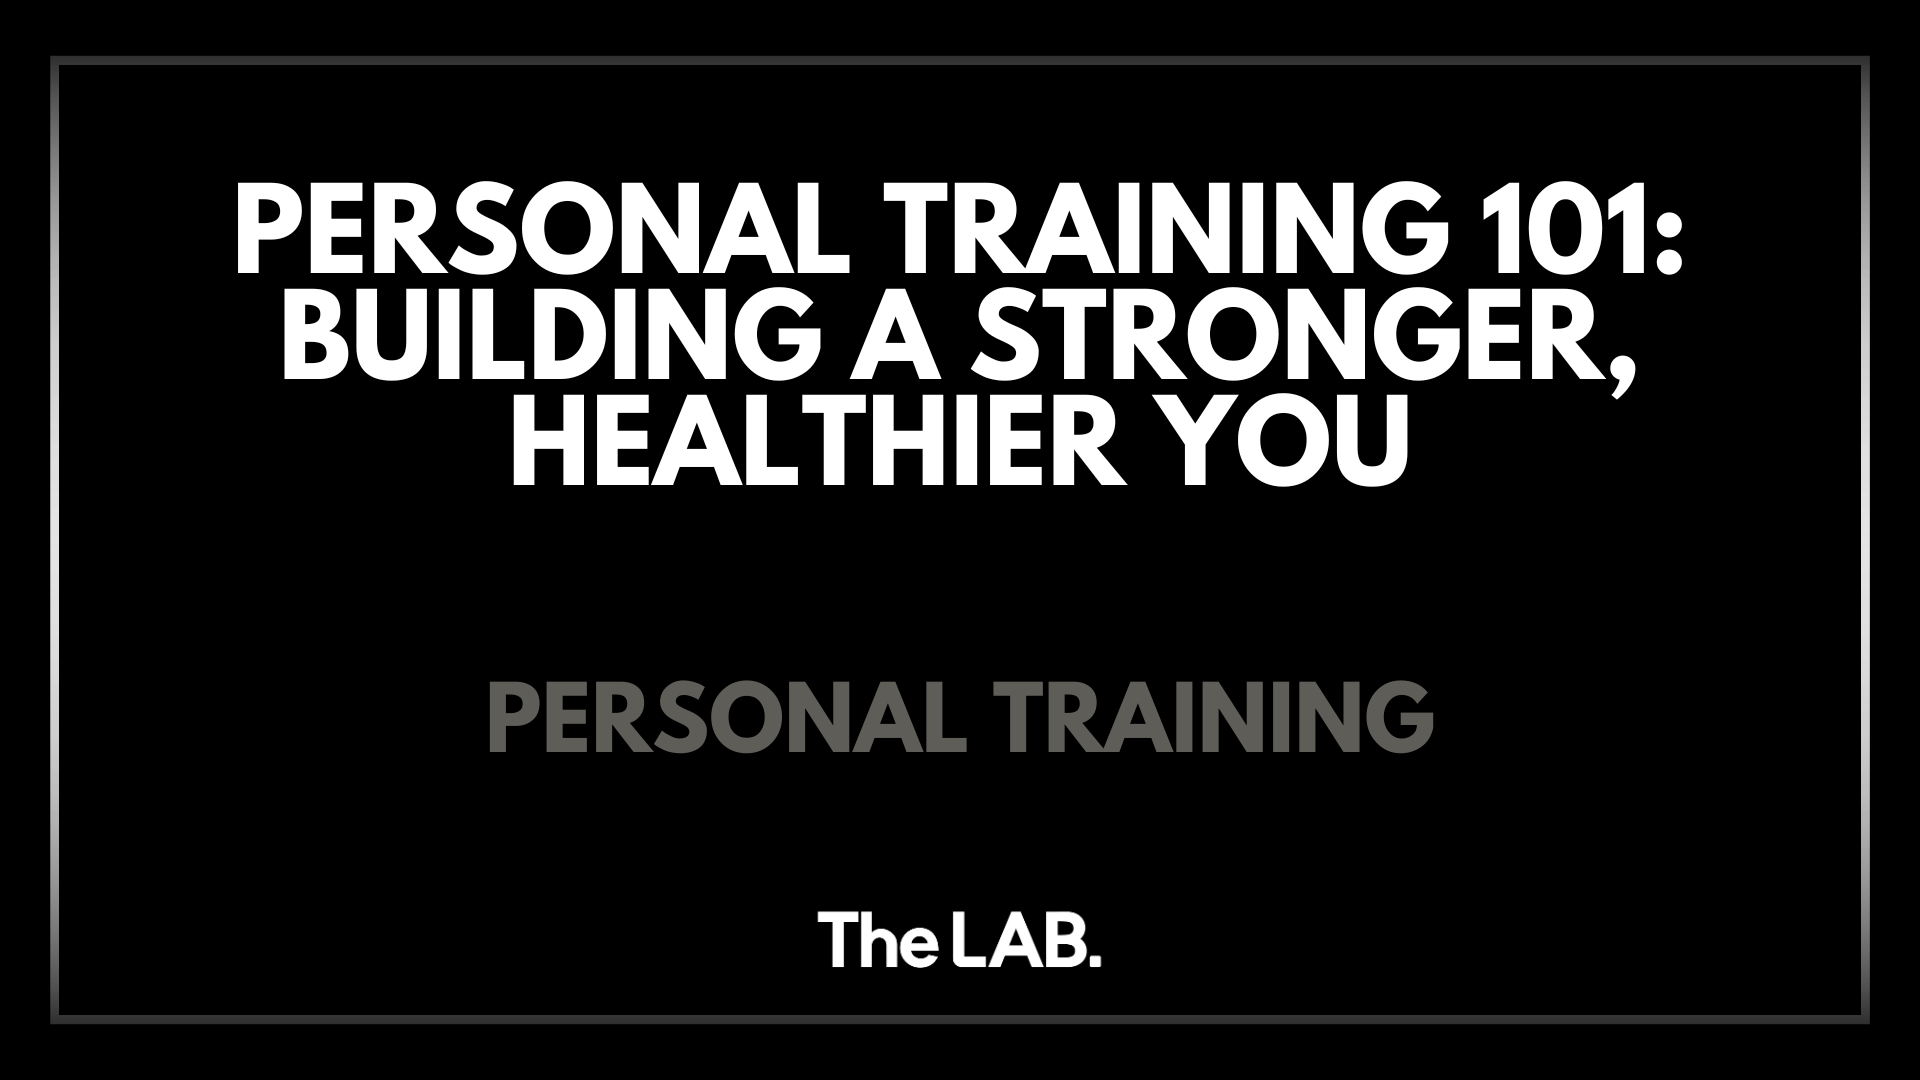 Personal Training 101: Building a Stronger, Healthier You